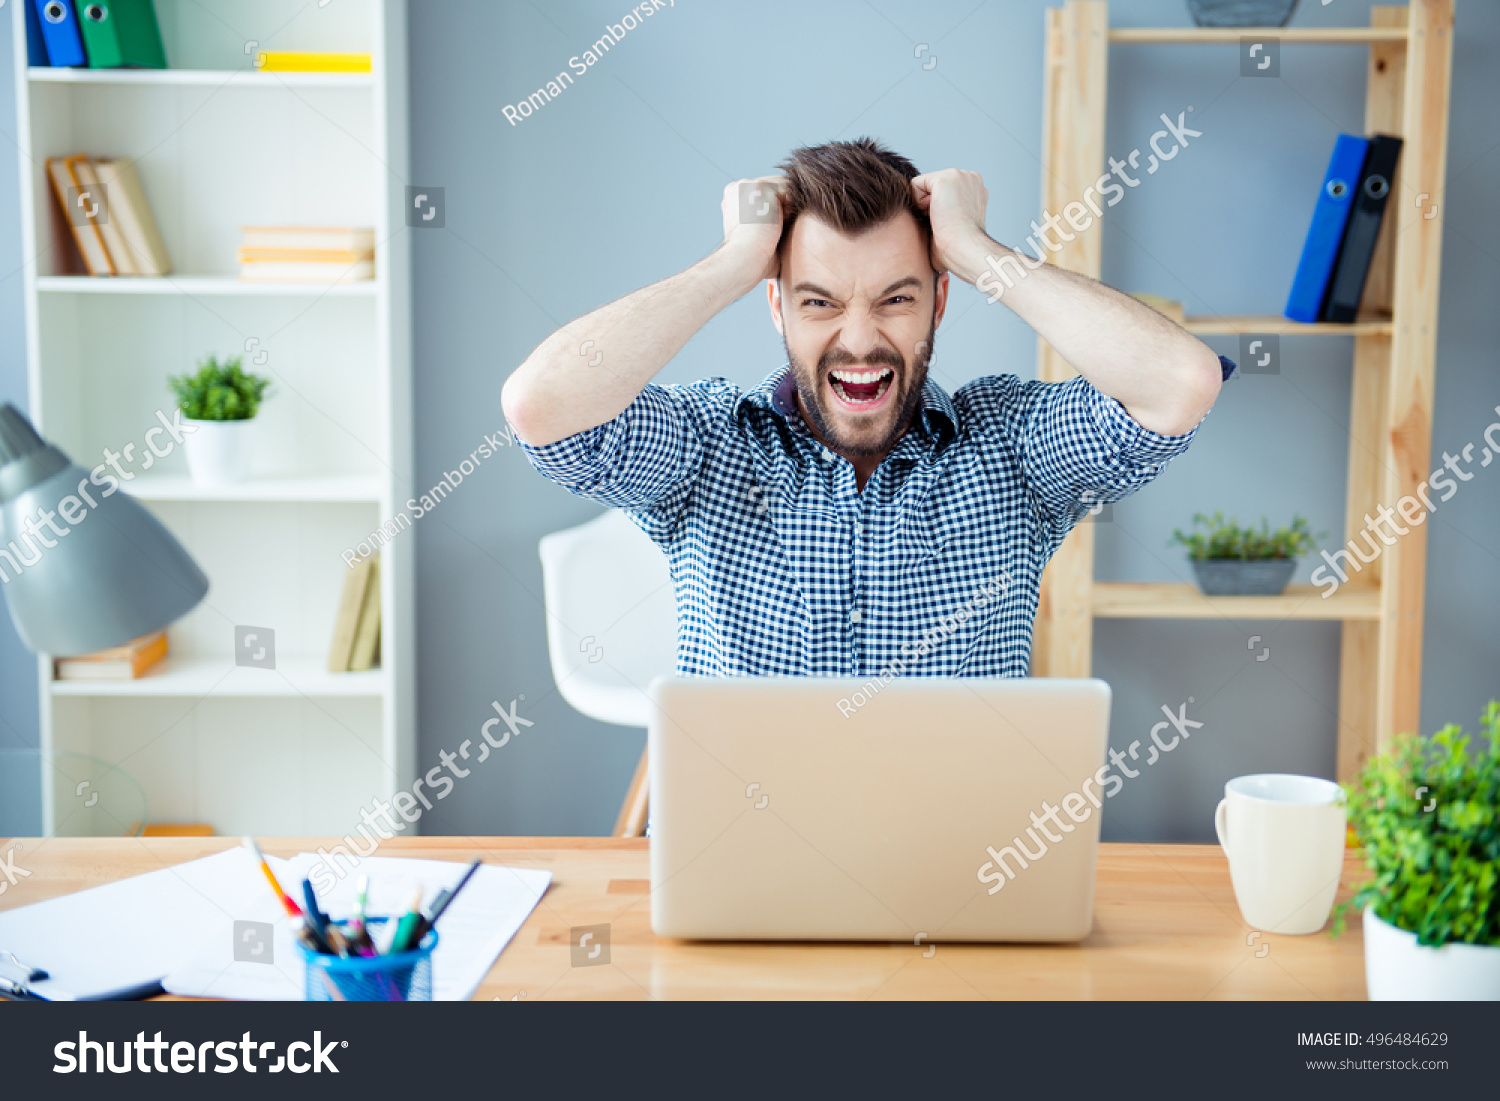 Frustrated  tired man  with laptop having a lot of work and screaming #496484629